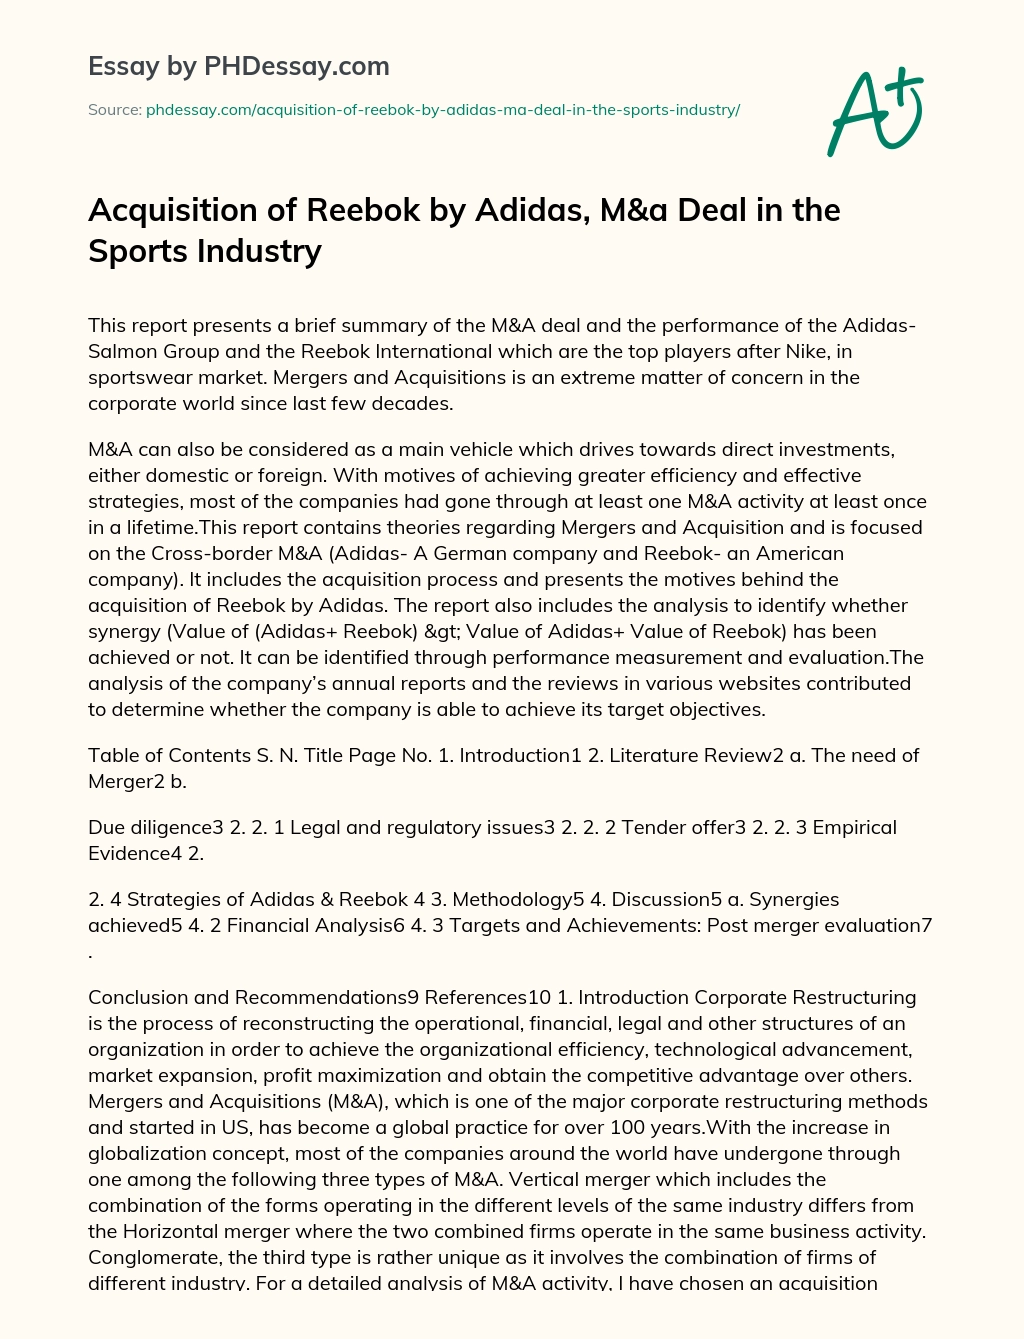 Acquisition of Reebok by Adidas, M&A Deal in the Sports Industry essay